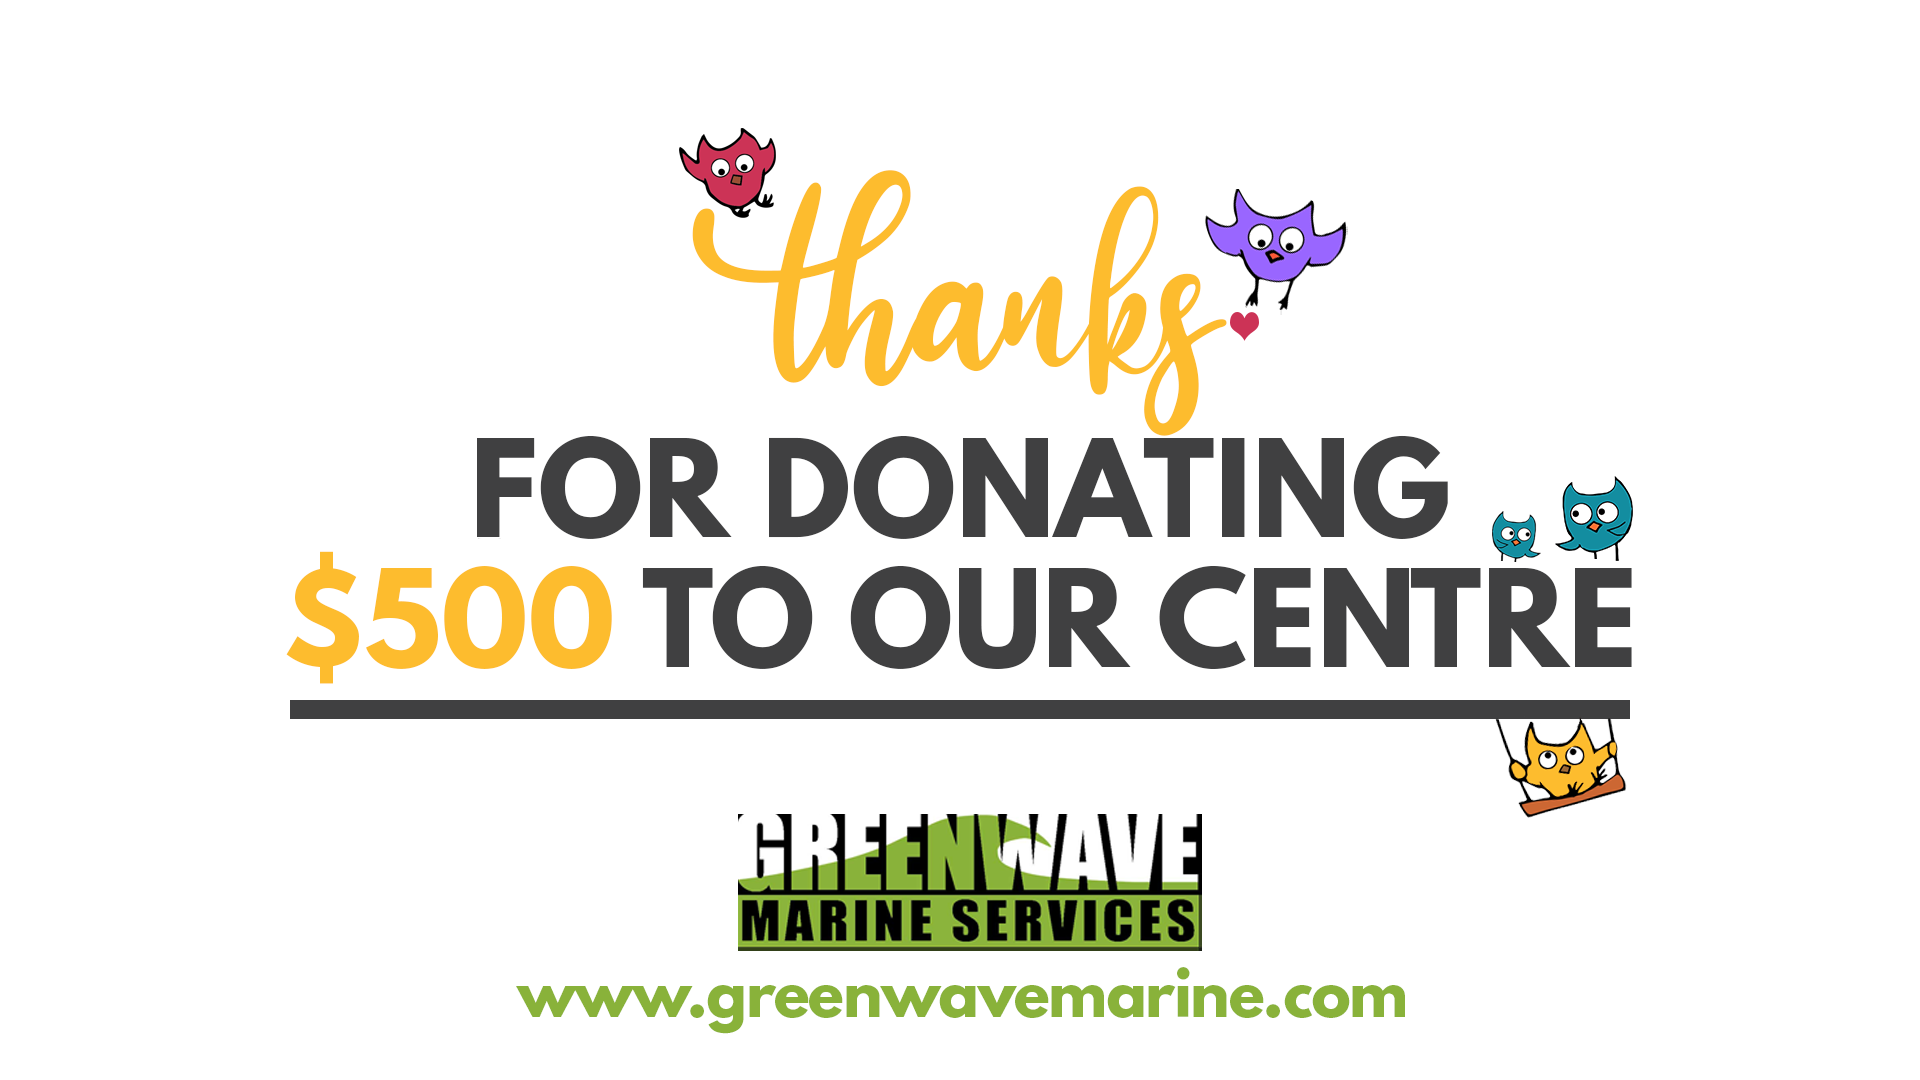 Green Wave Marine Services donated to the HMBCCS